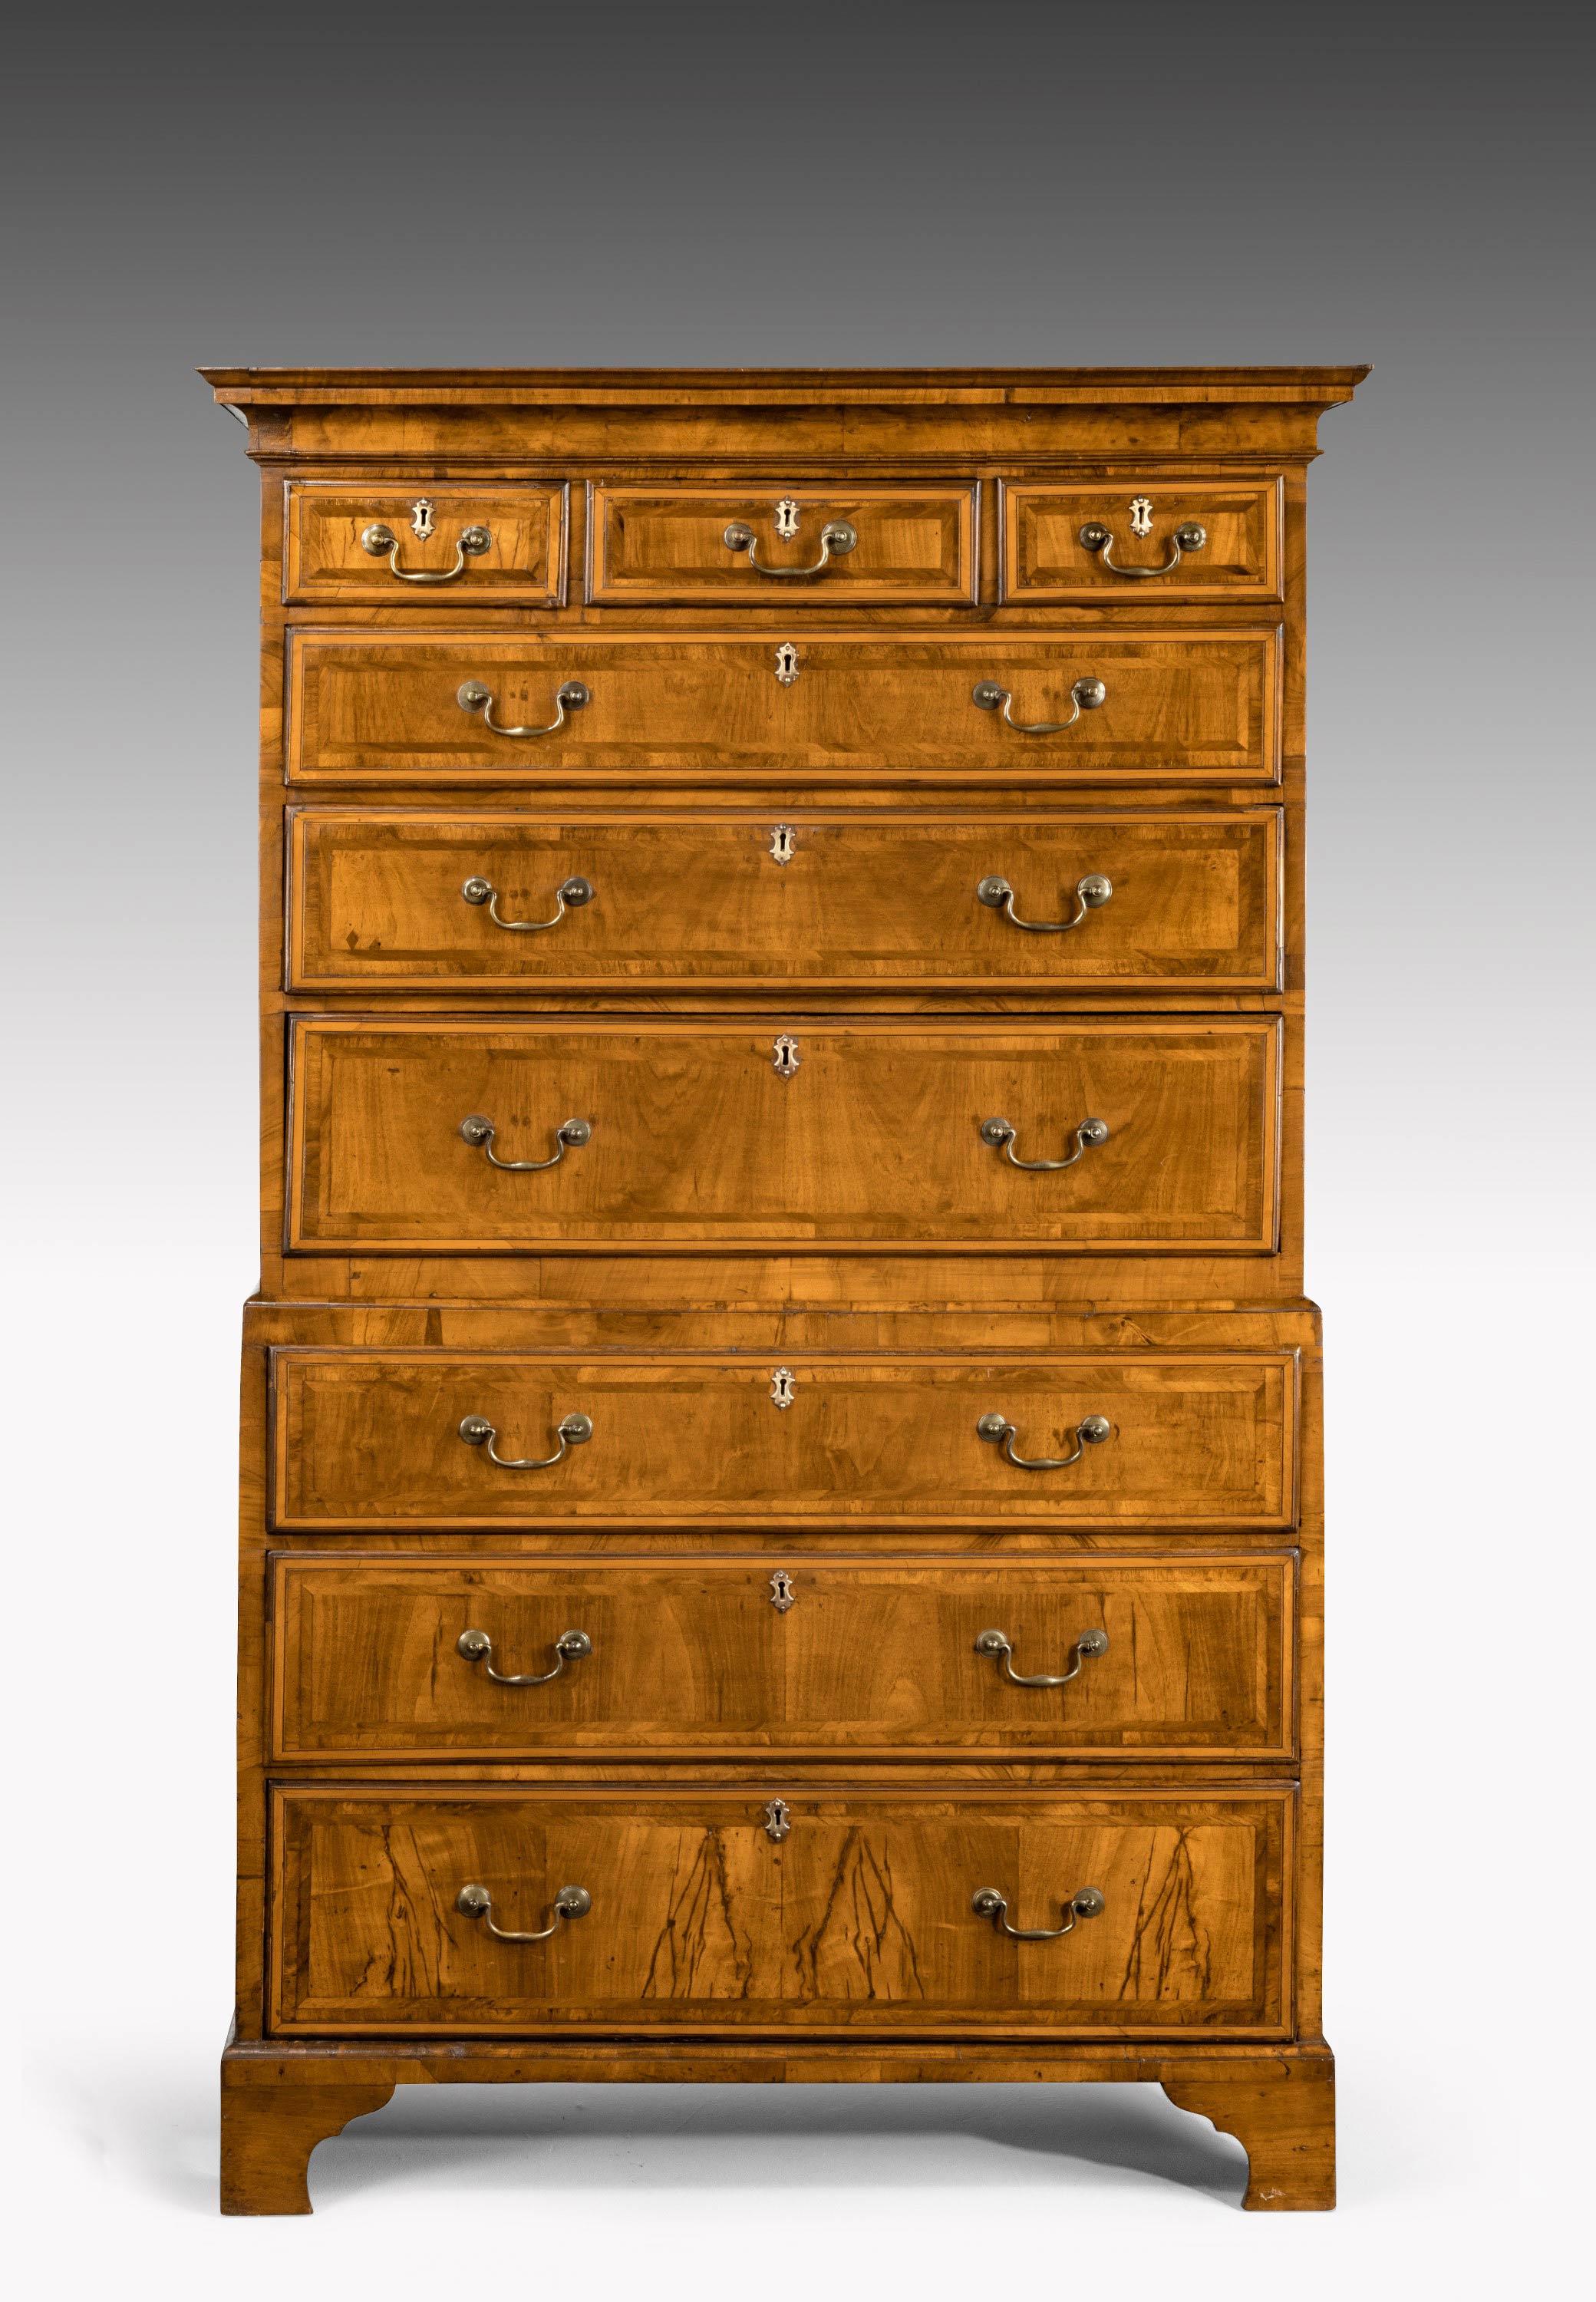 A very good looking mid-18th century walnut chest-on-chest of small proportions. With replaced period handles. The drawer fronts with complex inlaid walnut and herringbone etchings.
   